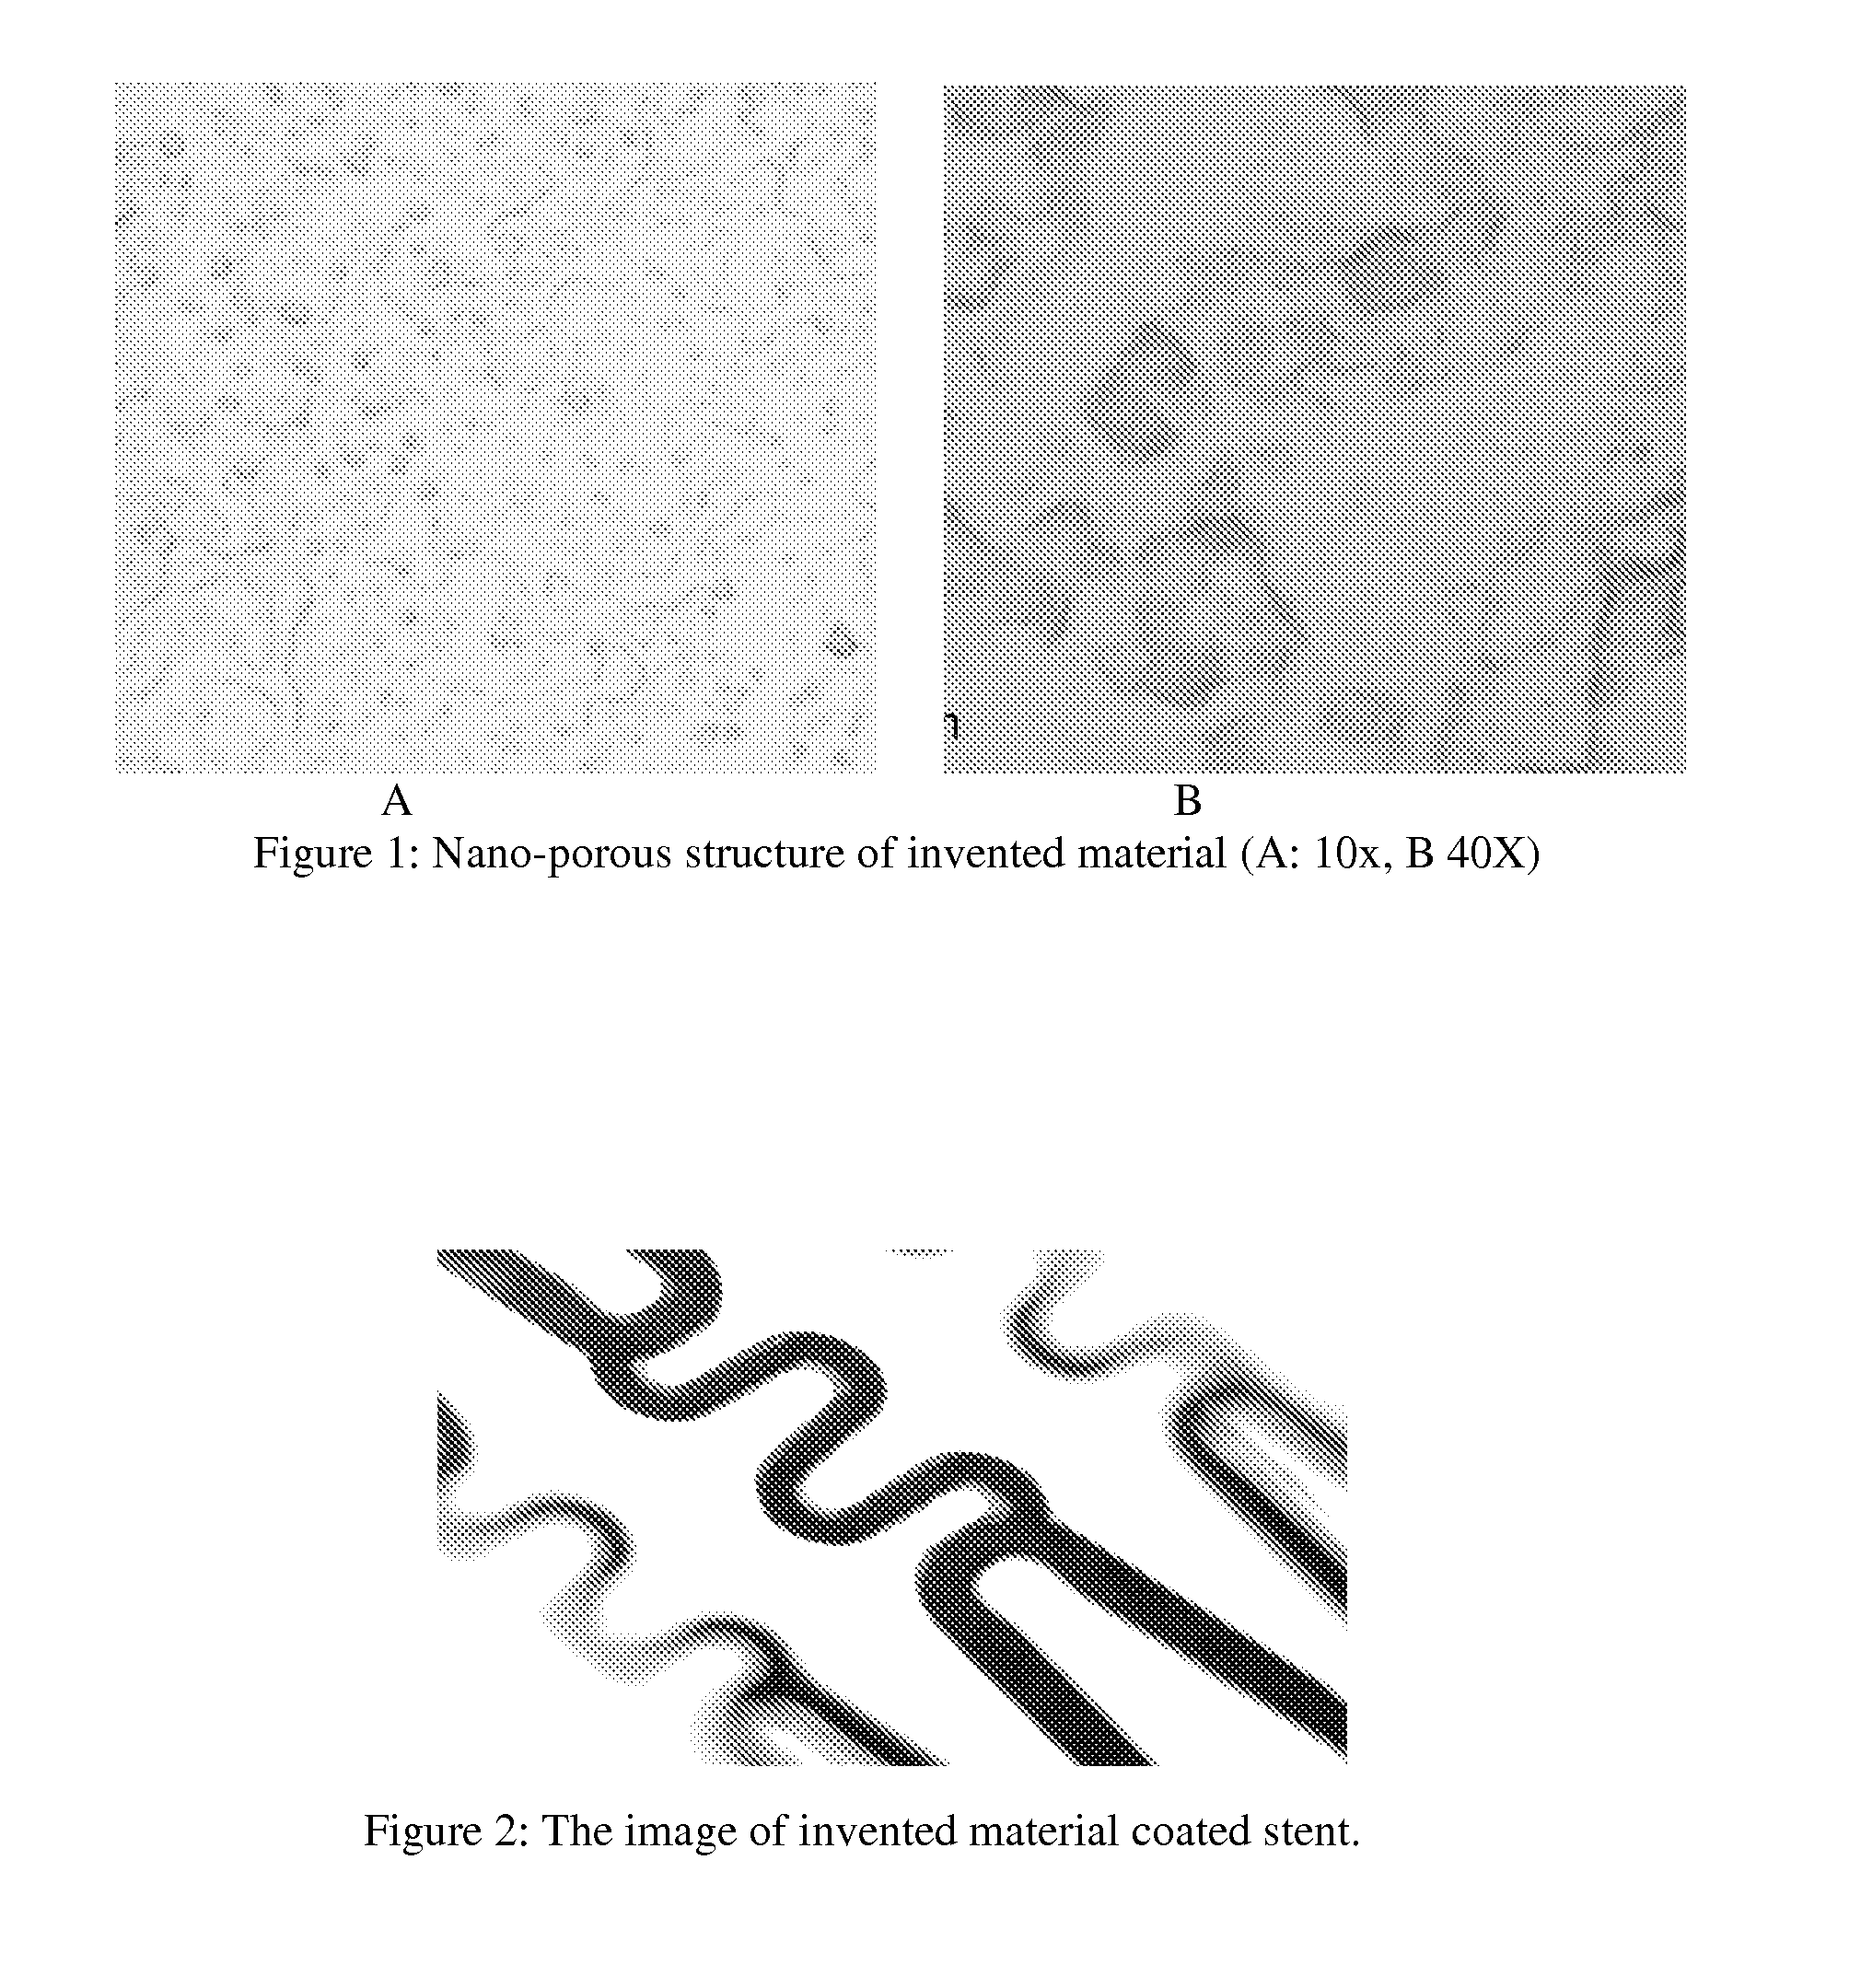 Biodegradable Materials and Methods of Use